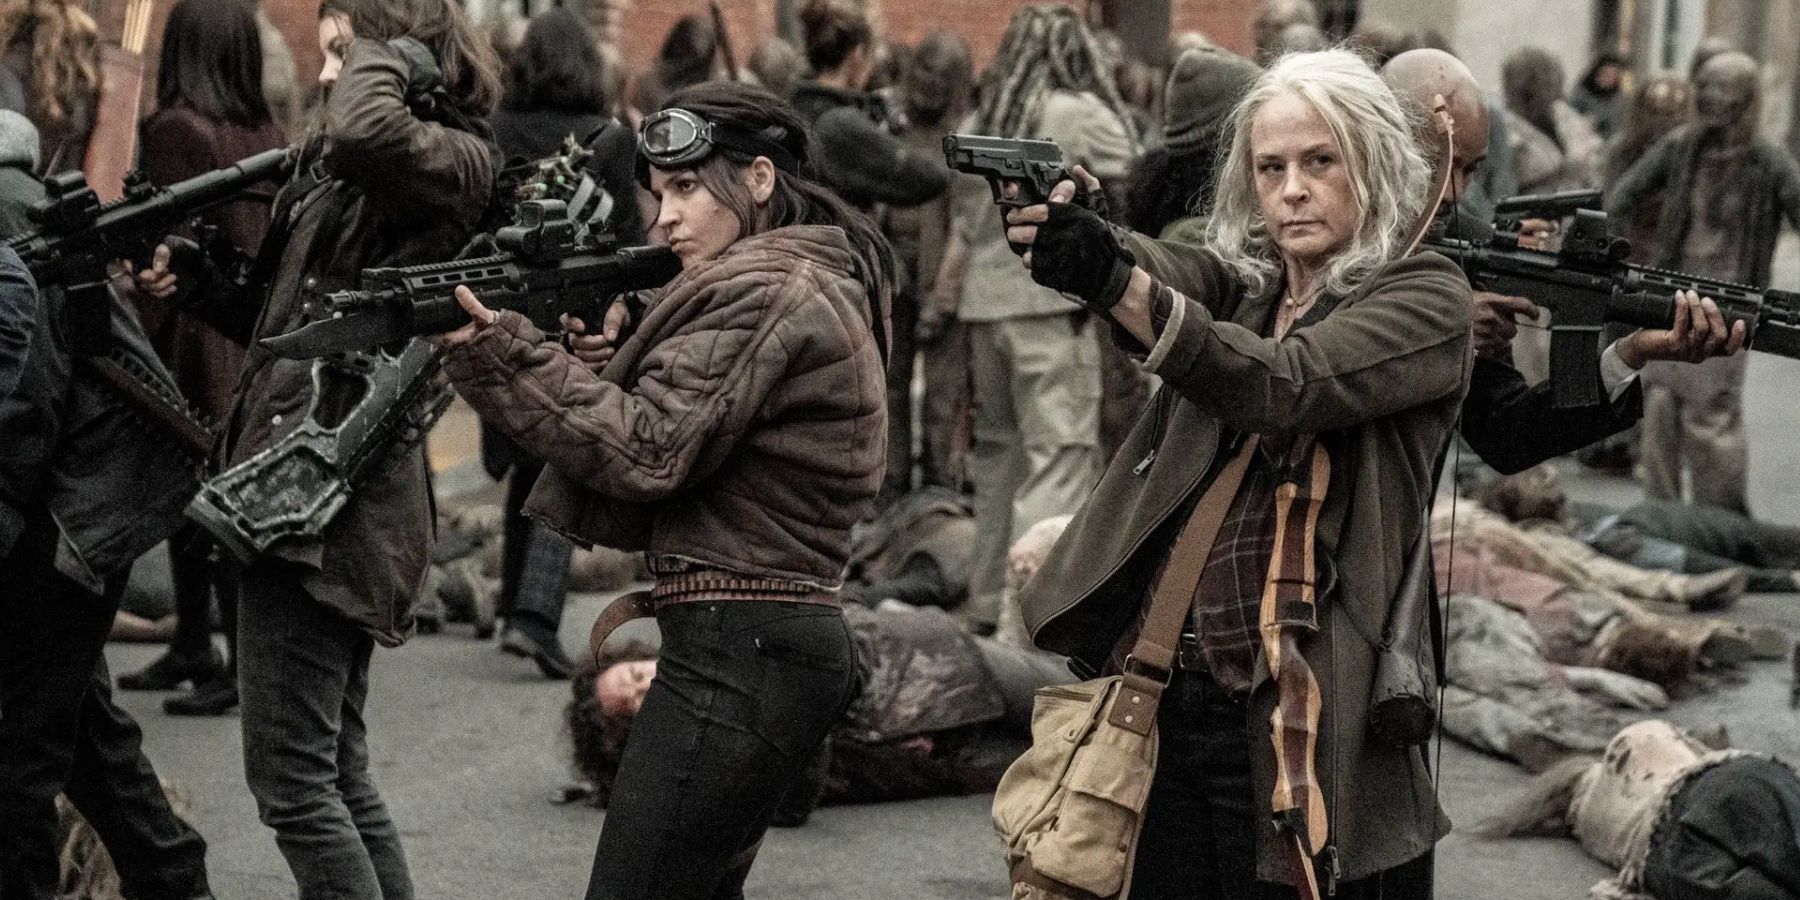 An image of Carol fighting the zombies in The Walking Dead